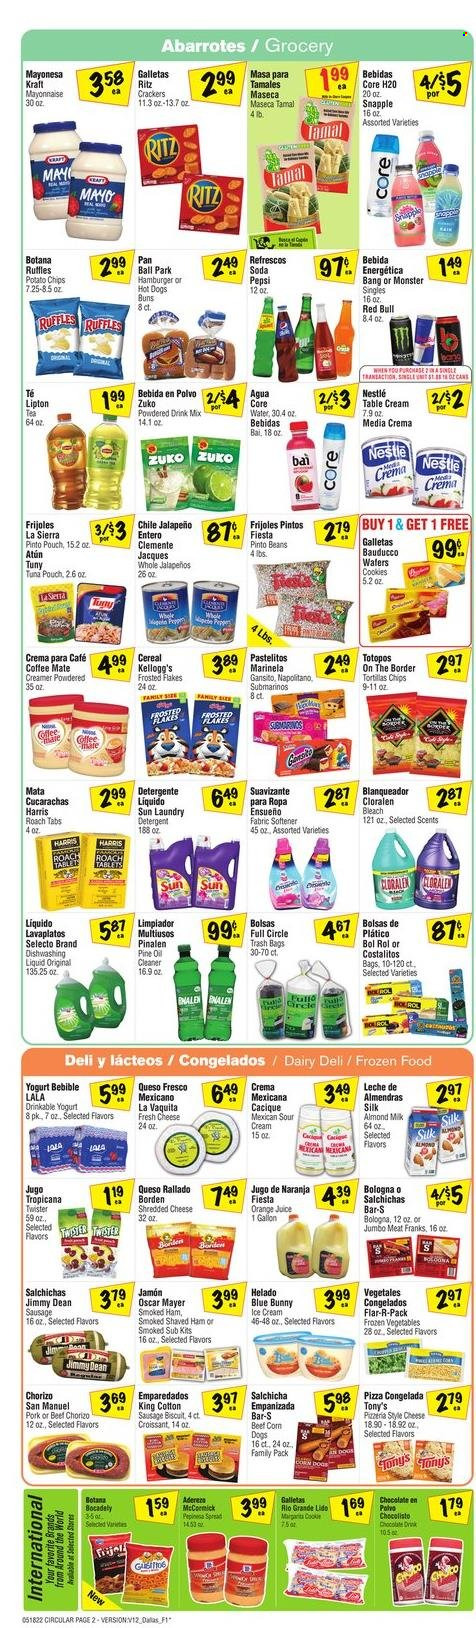 thumbnail - Fiesta Mart Flyer - 05/18/2022 - 05/24/2022 - Sales products - tortillas, croissant, buns, jalapeño, tuna, hot dog, pizza, hamburger, Kraft®, Jimmy Dean, ham, chorizo, smoked ham, bologna sausage, Oscar Mayer, sausage, shredded cheese, queso fresco, yoghurt, Coffee-Mate, sour cream, creamer, mayonnaise, Blue Bunny, frozen vegetables, cookies, Nestlé, chocolate, crackers, Kellogg's, biscuit, RITZ, potato chips, Mexicano, Ruffles, Harris, pinto beans, cereals, Frosted Flakes, oil, Pepsi, orange juice, juice, Monster, Lipton, Red Bull, Snapple, Bai, Tropicana Twister, soda, powder drink, tea, detergent, cleaner, bleach, fabric softener, laundry detergent, dishwashing liquid, trash bags. Page 2.